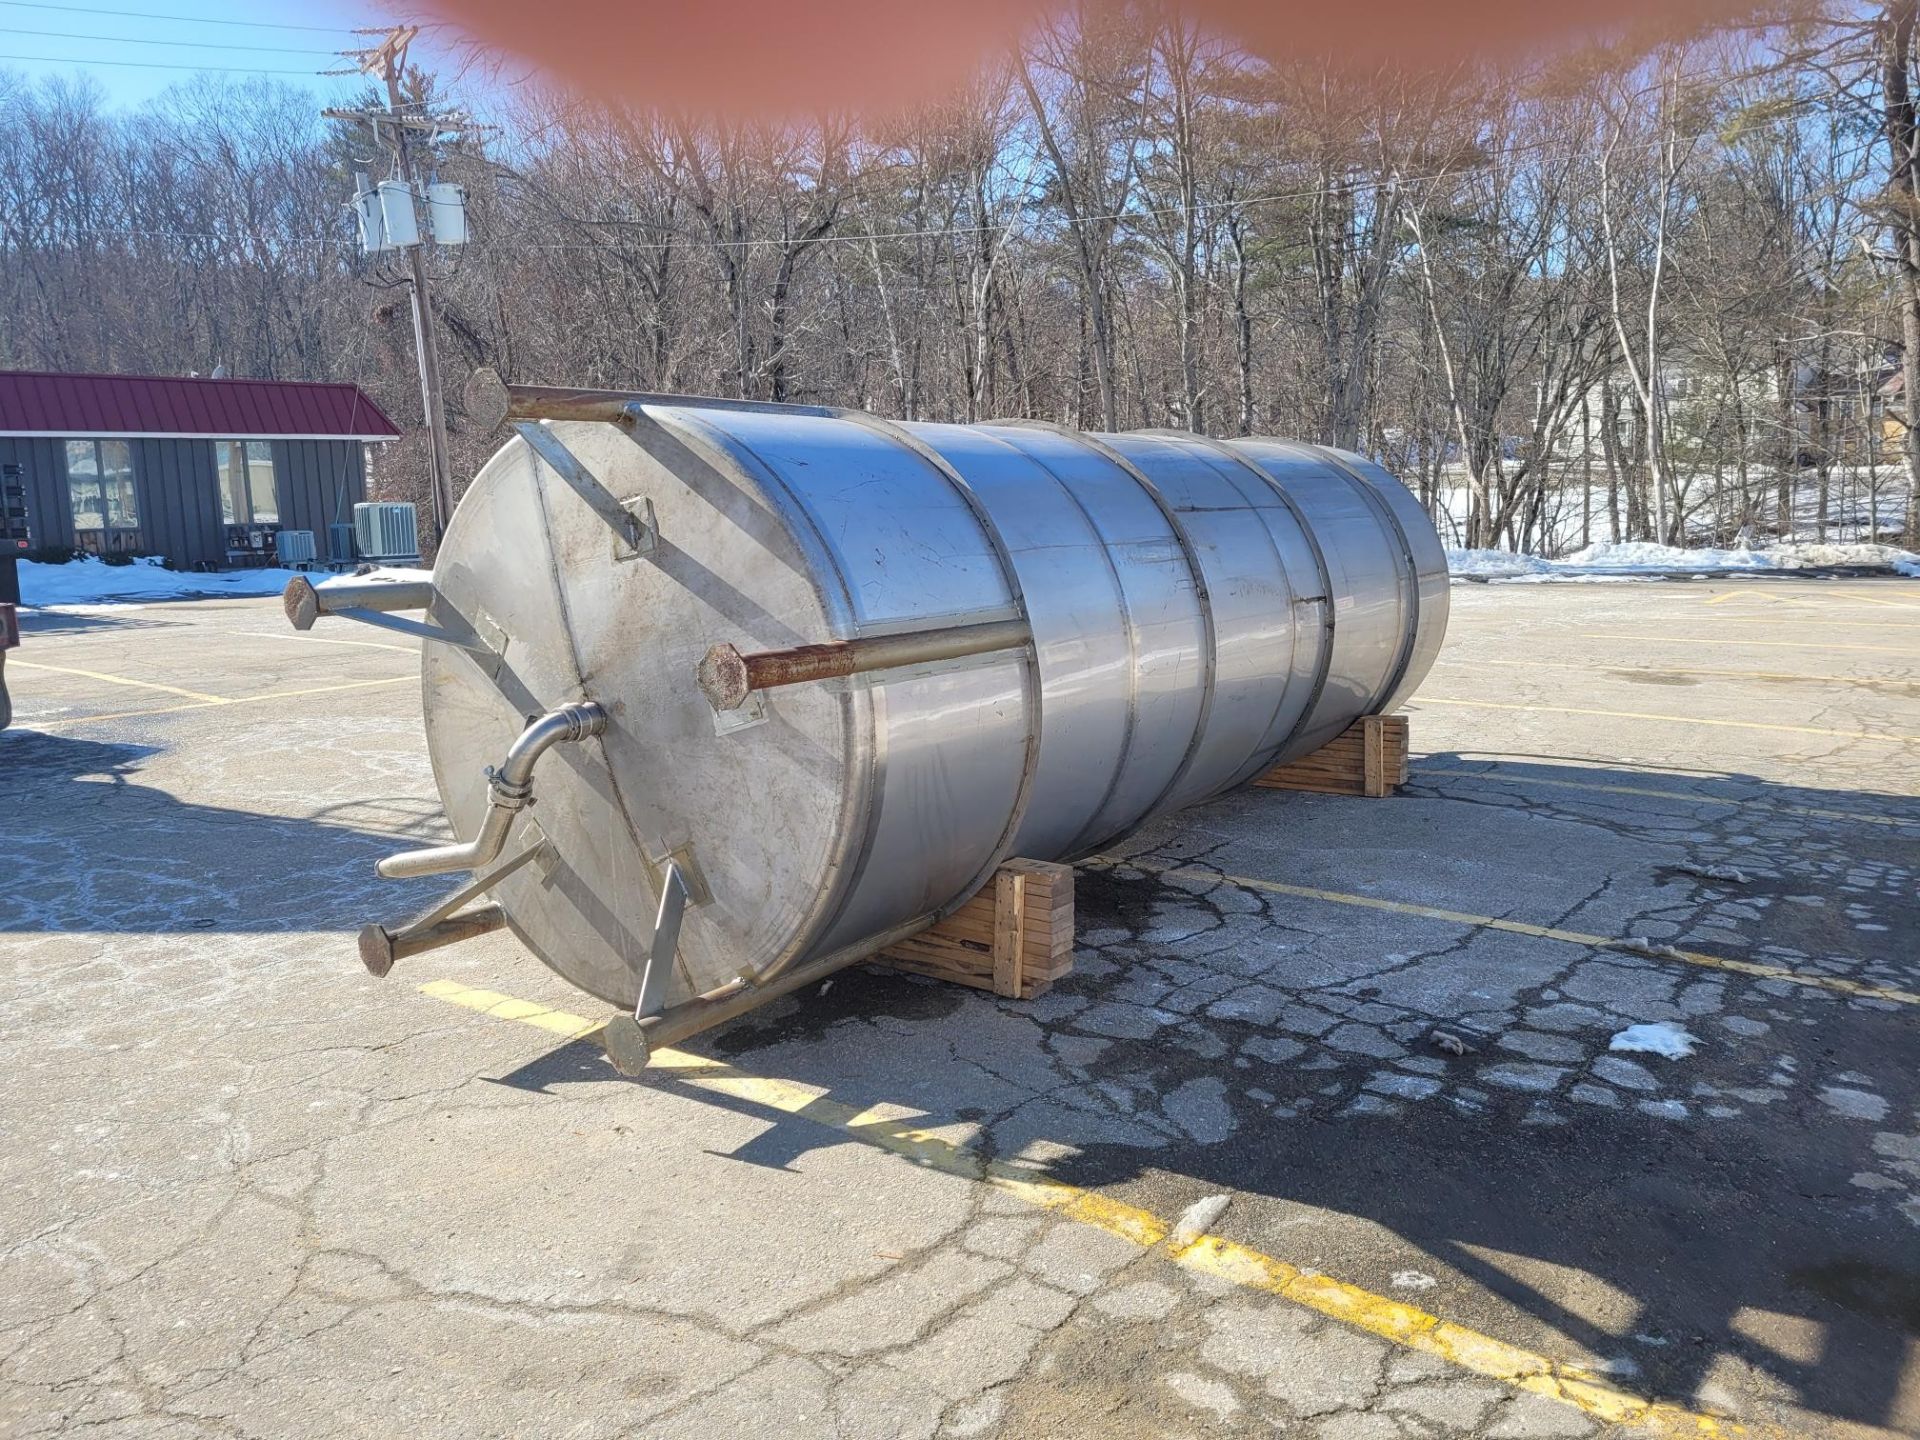 4000 gallon capacity stainless steel single wall vertical tank, type 304 stainless steel, enclosed - Image 2 of 7